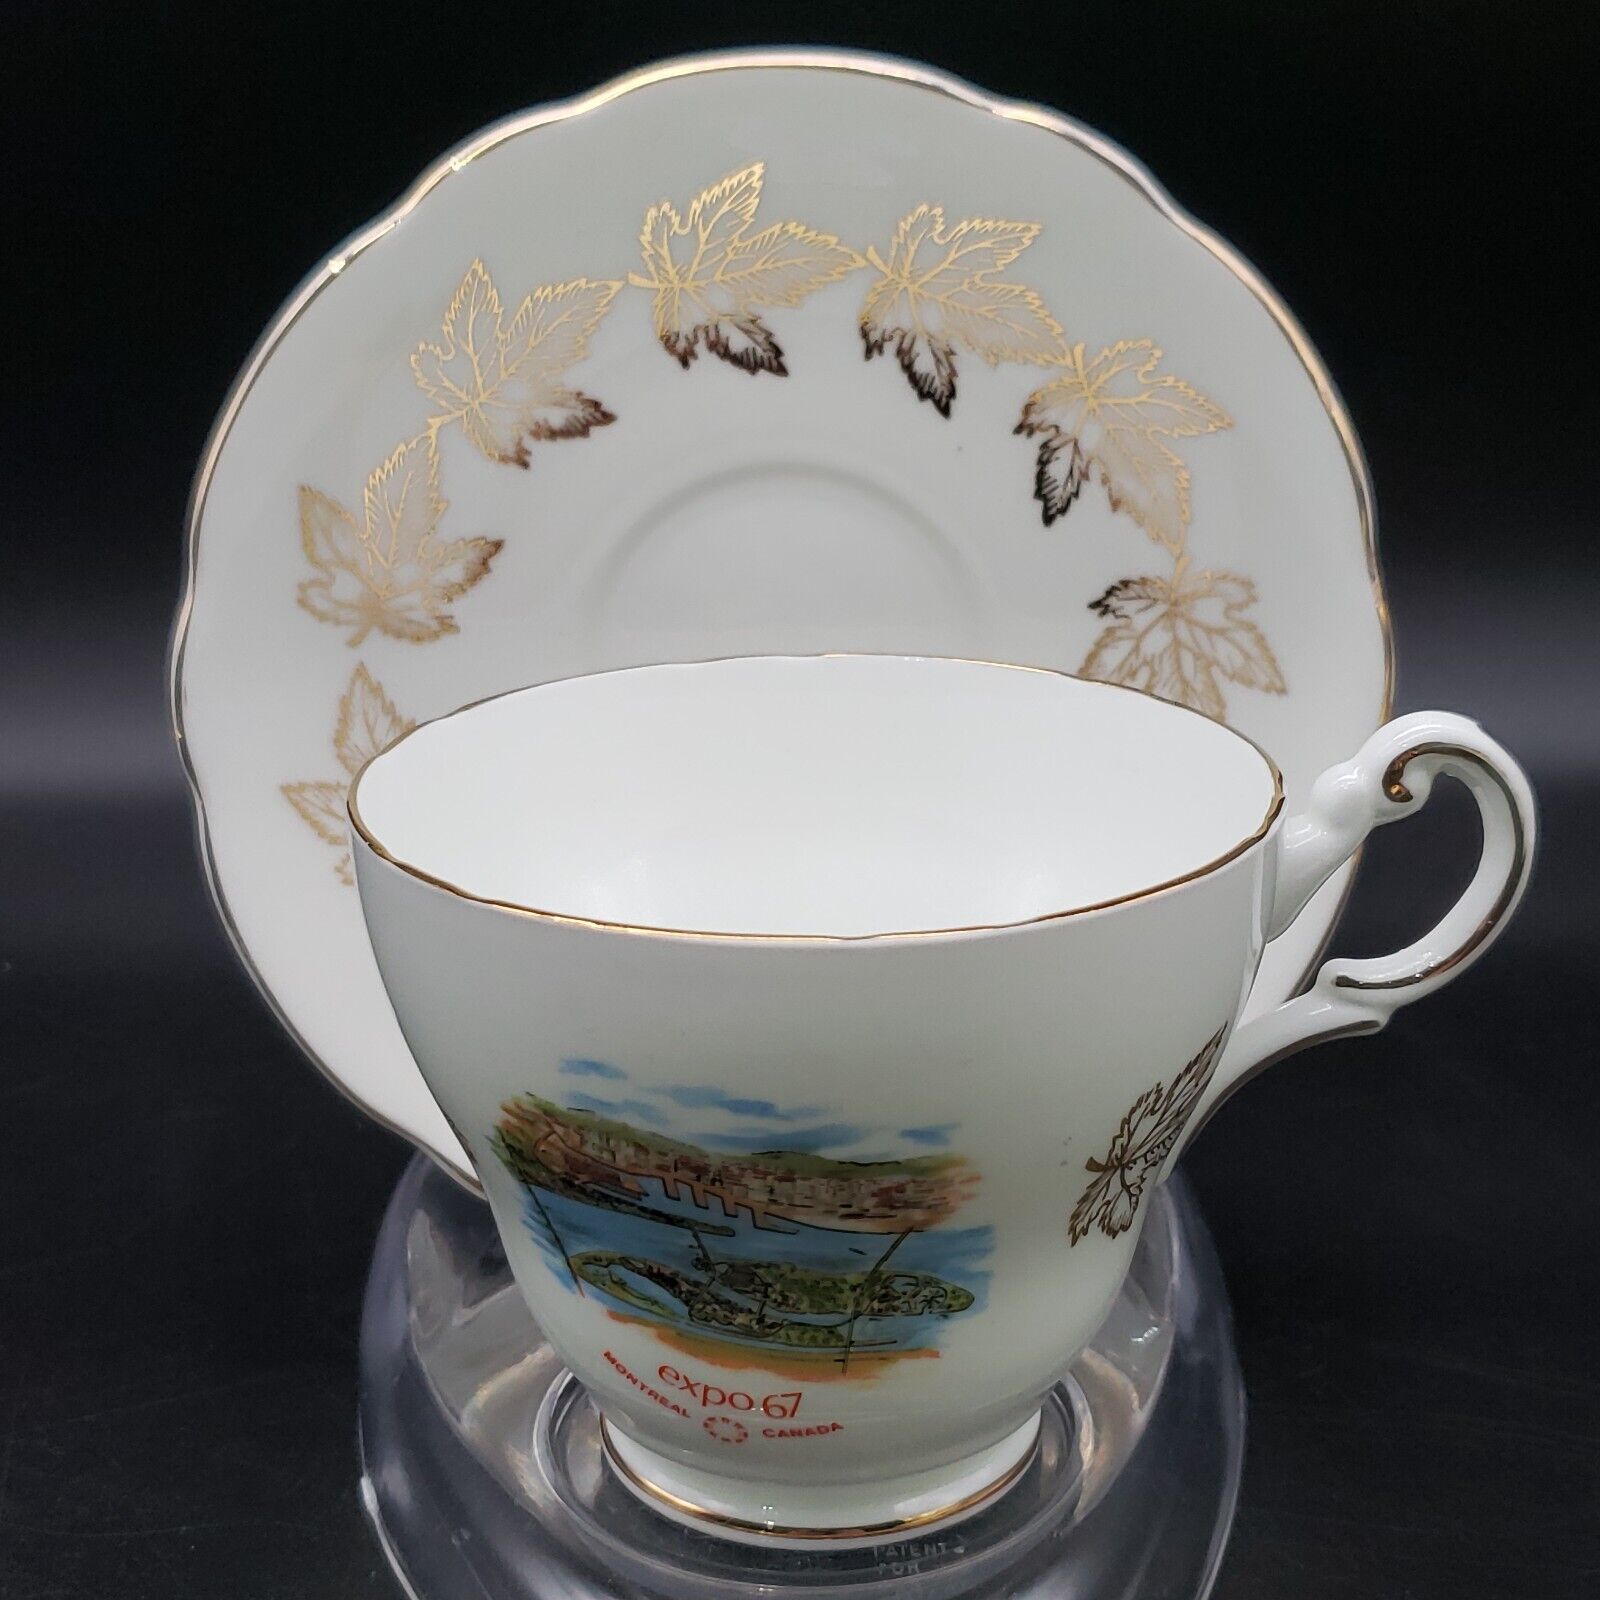 Vintage Royal Darwood Bone China Cup & Saucer Expo 67 Montreal Canada Maple Leaf